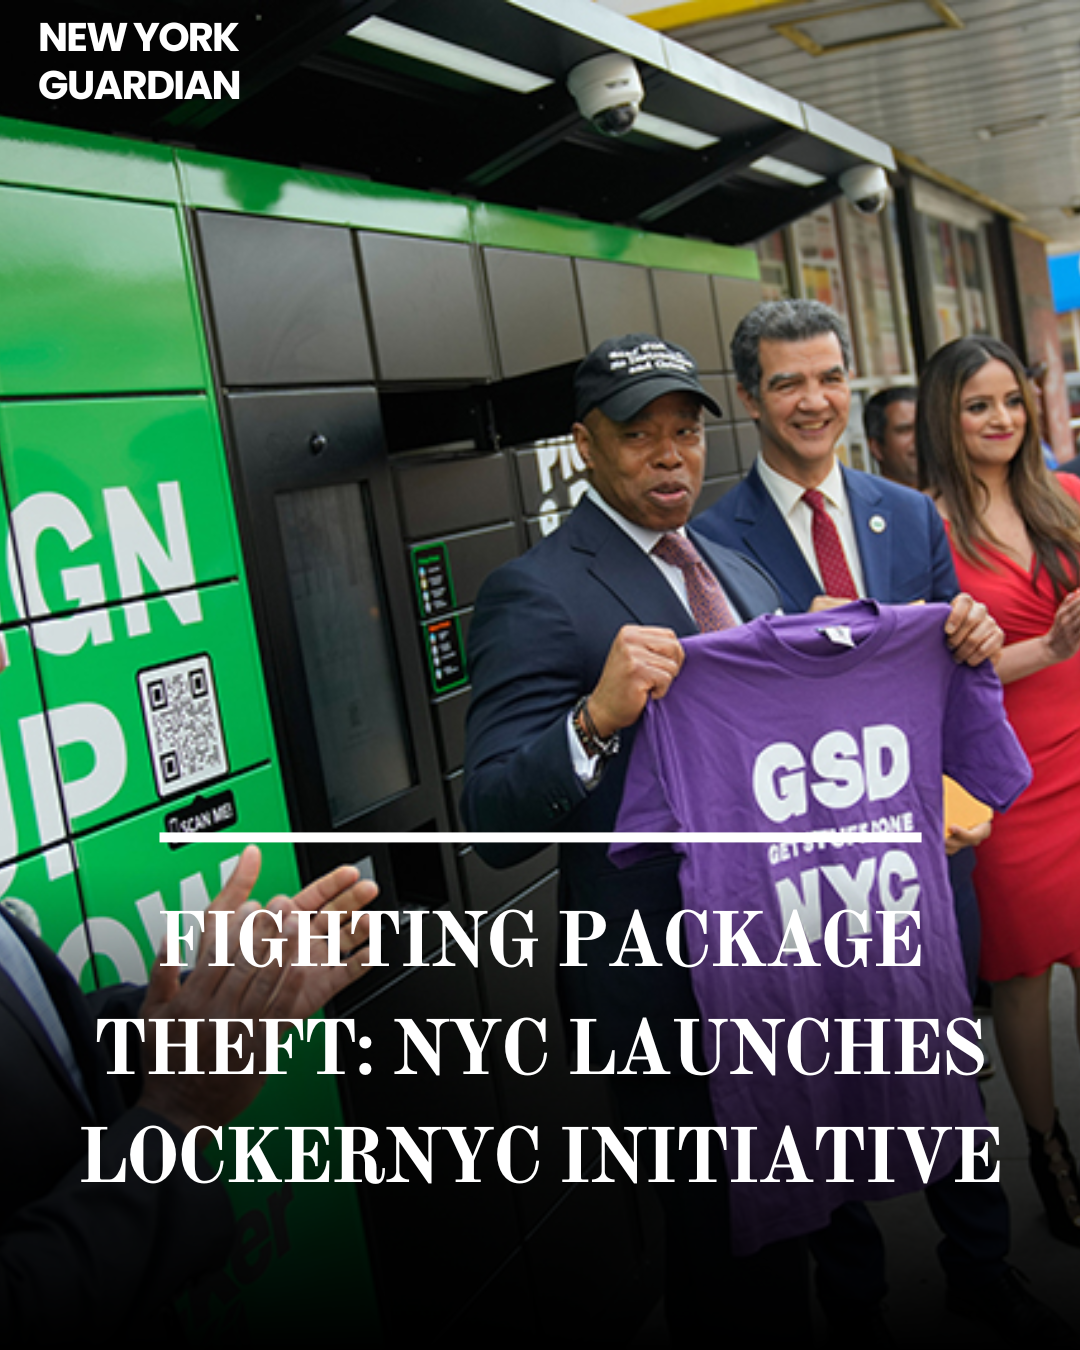 The LockerNYC initiative distributes free public delivery lockers throughout the city to protect items and streamline delivery.